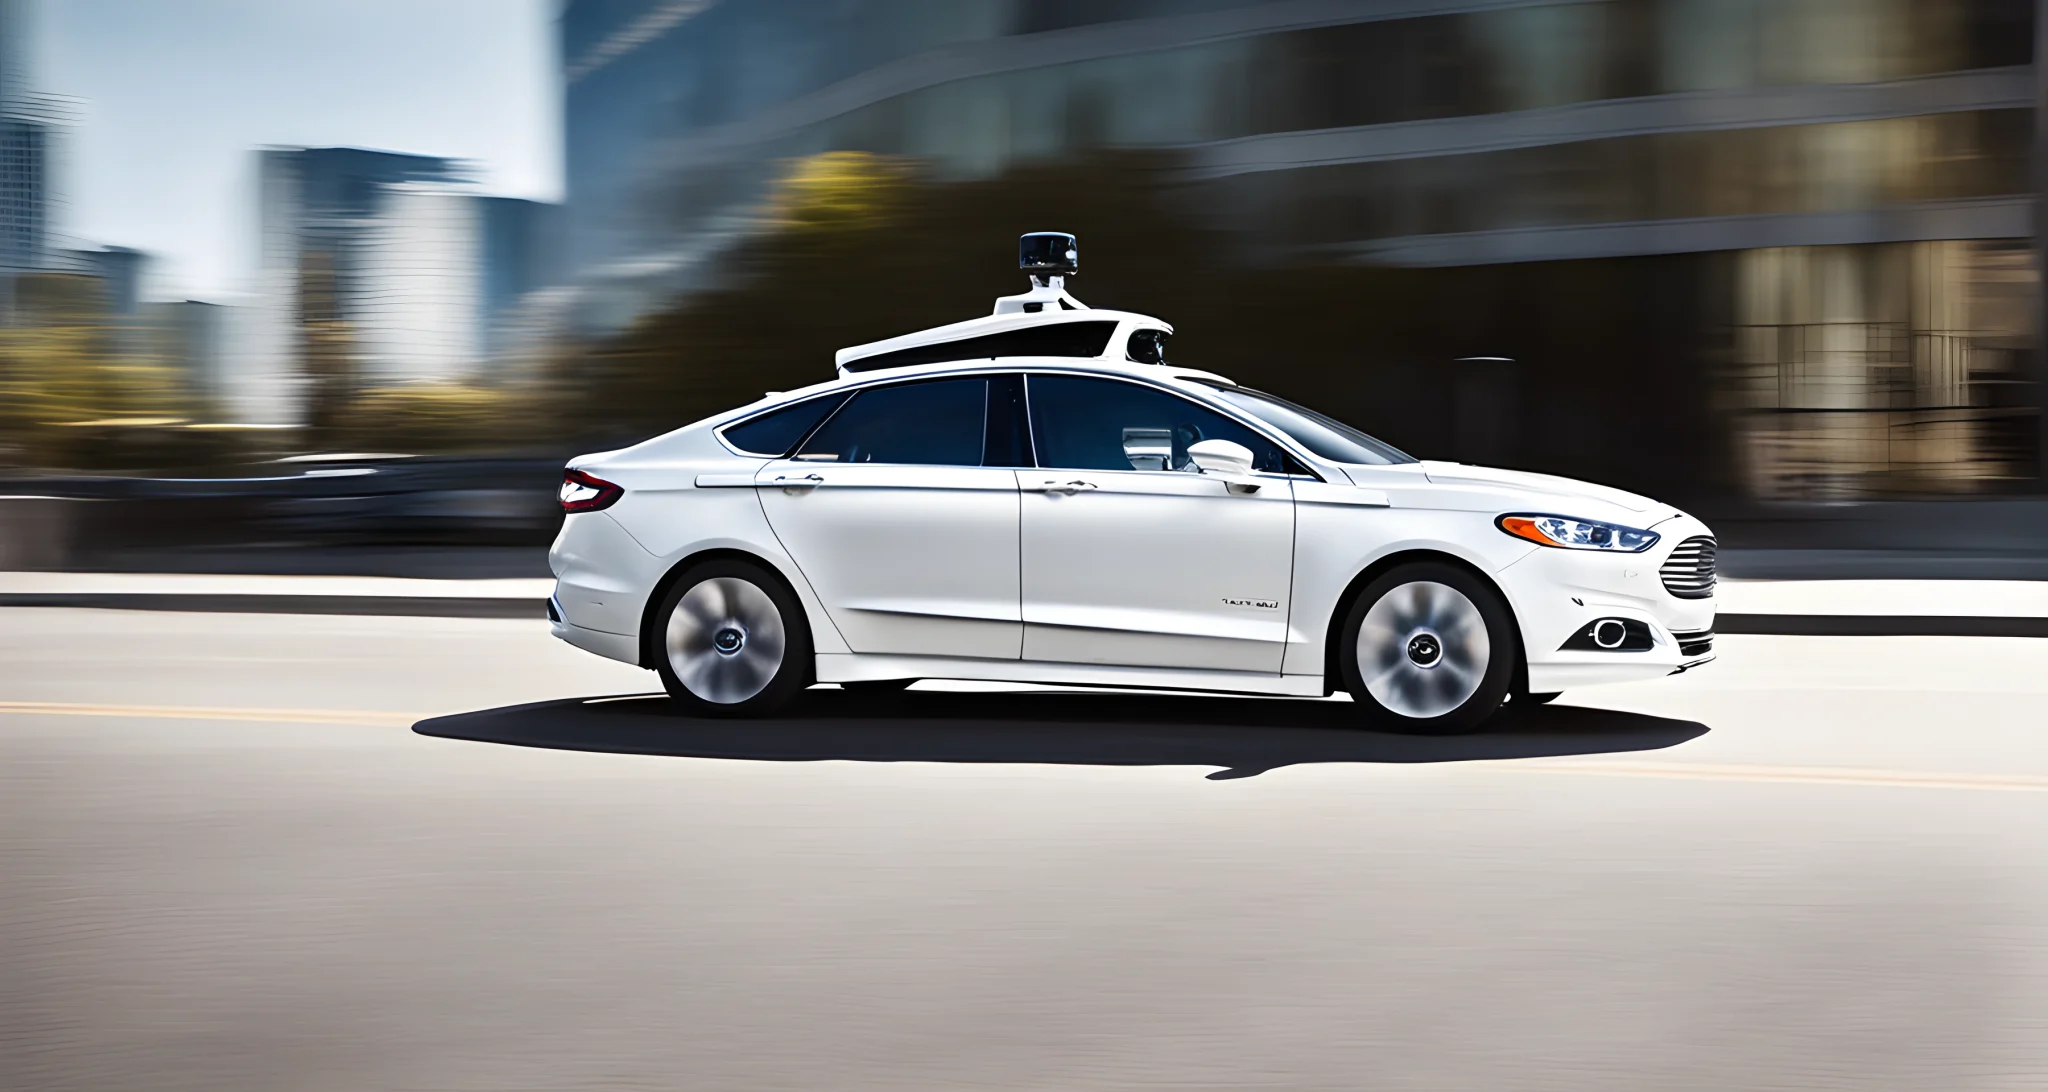 The image shows a sleek, white Ford self-driving car with sensors and cameras mounted on the exterior.